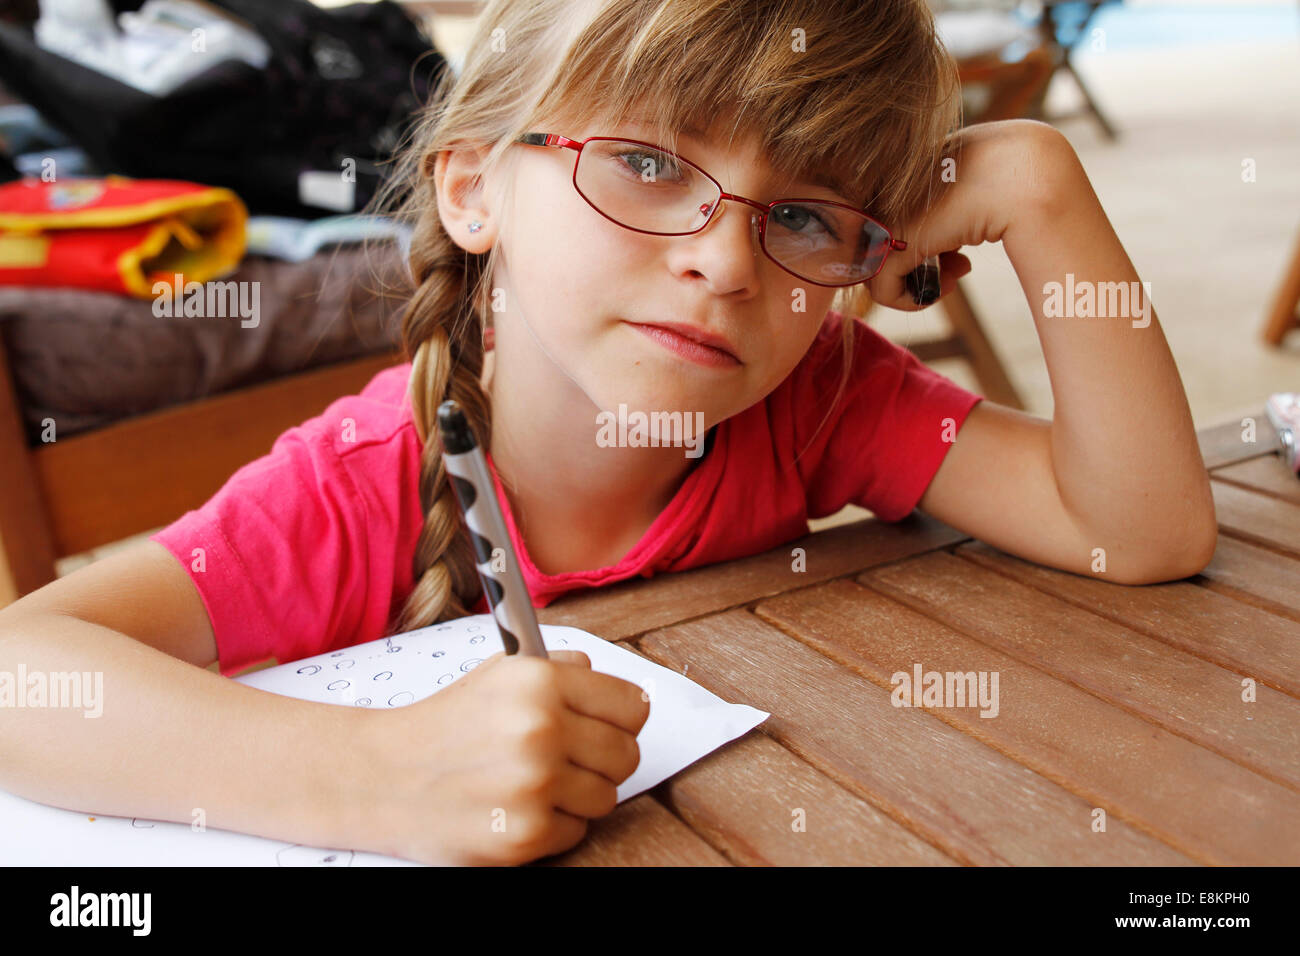 A 6-year old girl practising writing during the holidays. Stock Photo